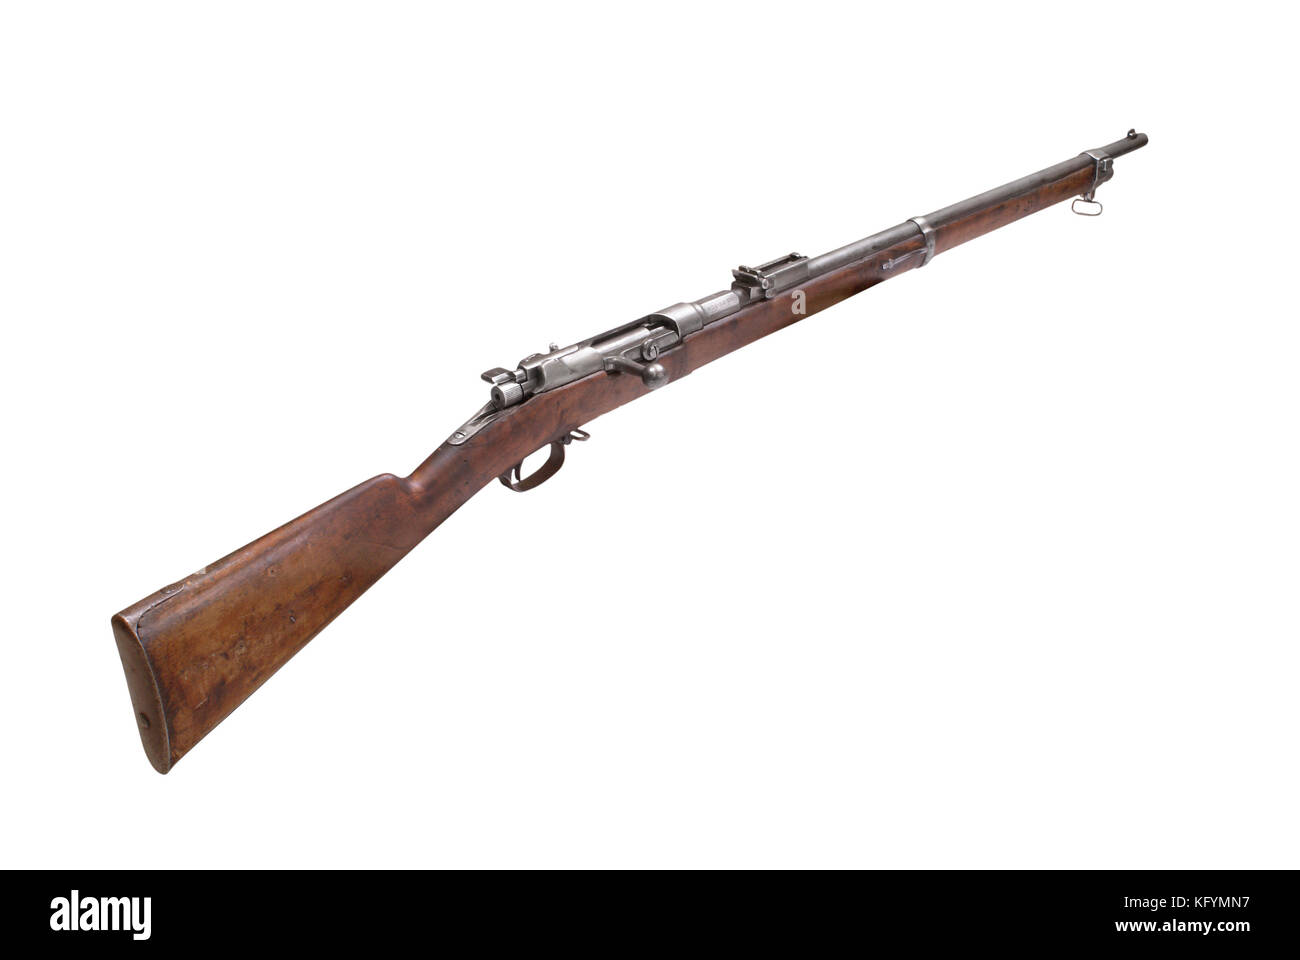 Germany at the WW2. Very popular German rifle Gewehr 98 (abbreviated G98 or Gew 98) was the standard German infantry rifle from 1898 to 1935, when it  Stock Photo